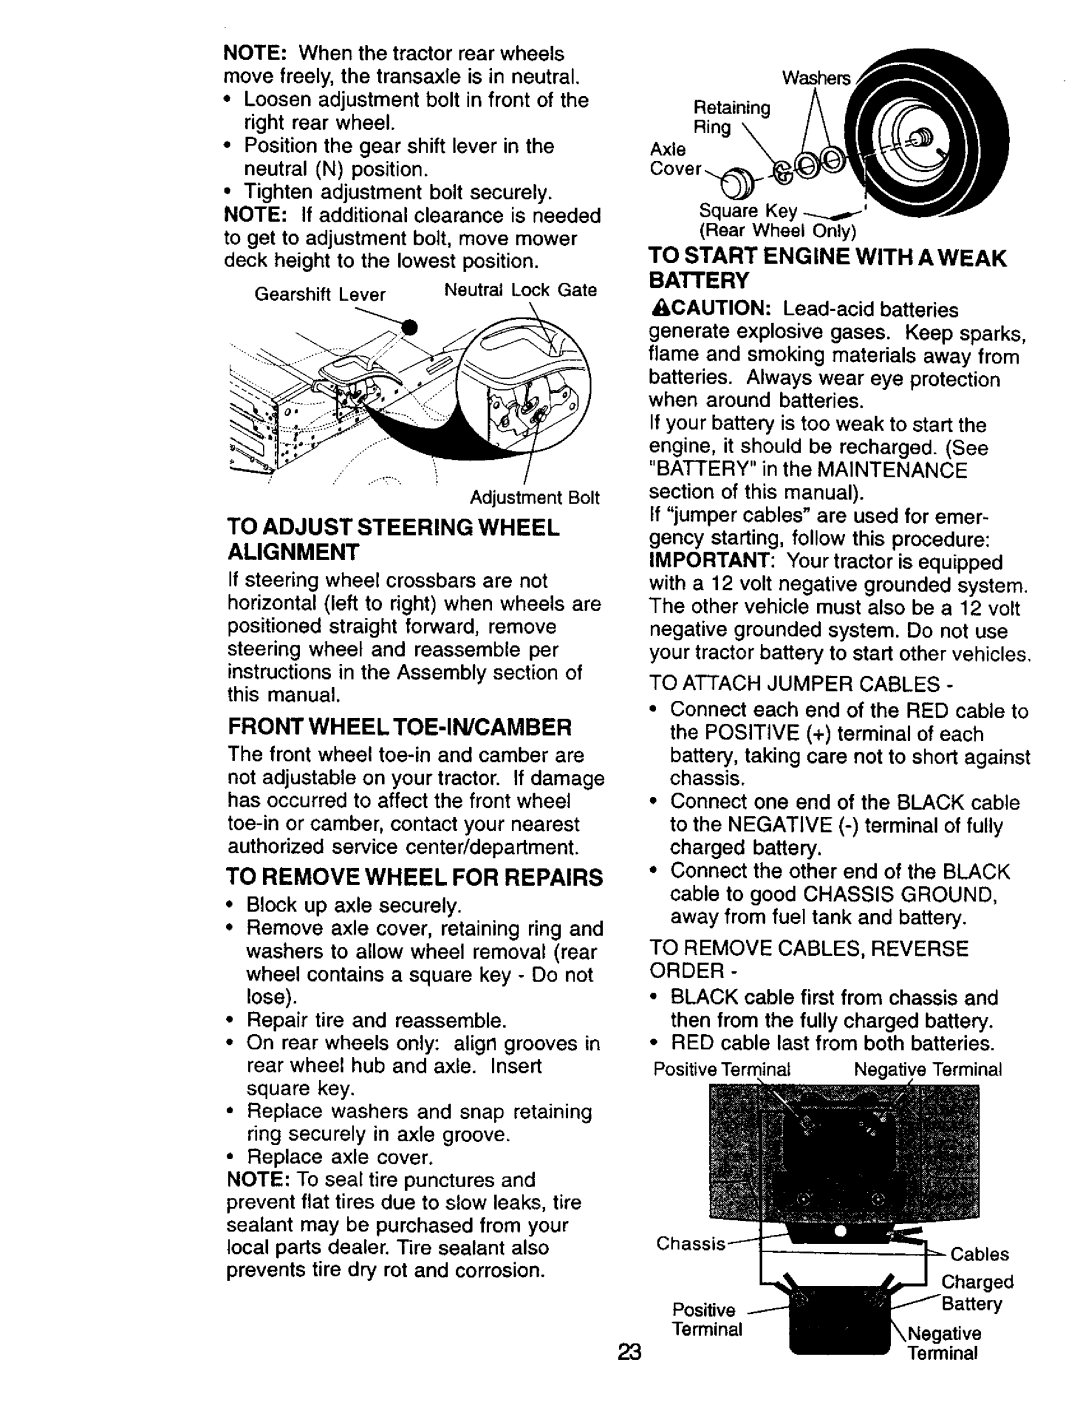 Craftsman 917.270732 owner manual To Adjust Steering Wheel Alignment, Front Wheel Toe-In/Camber 